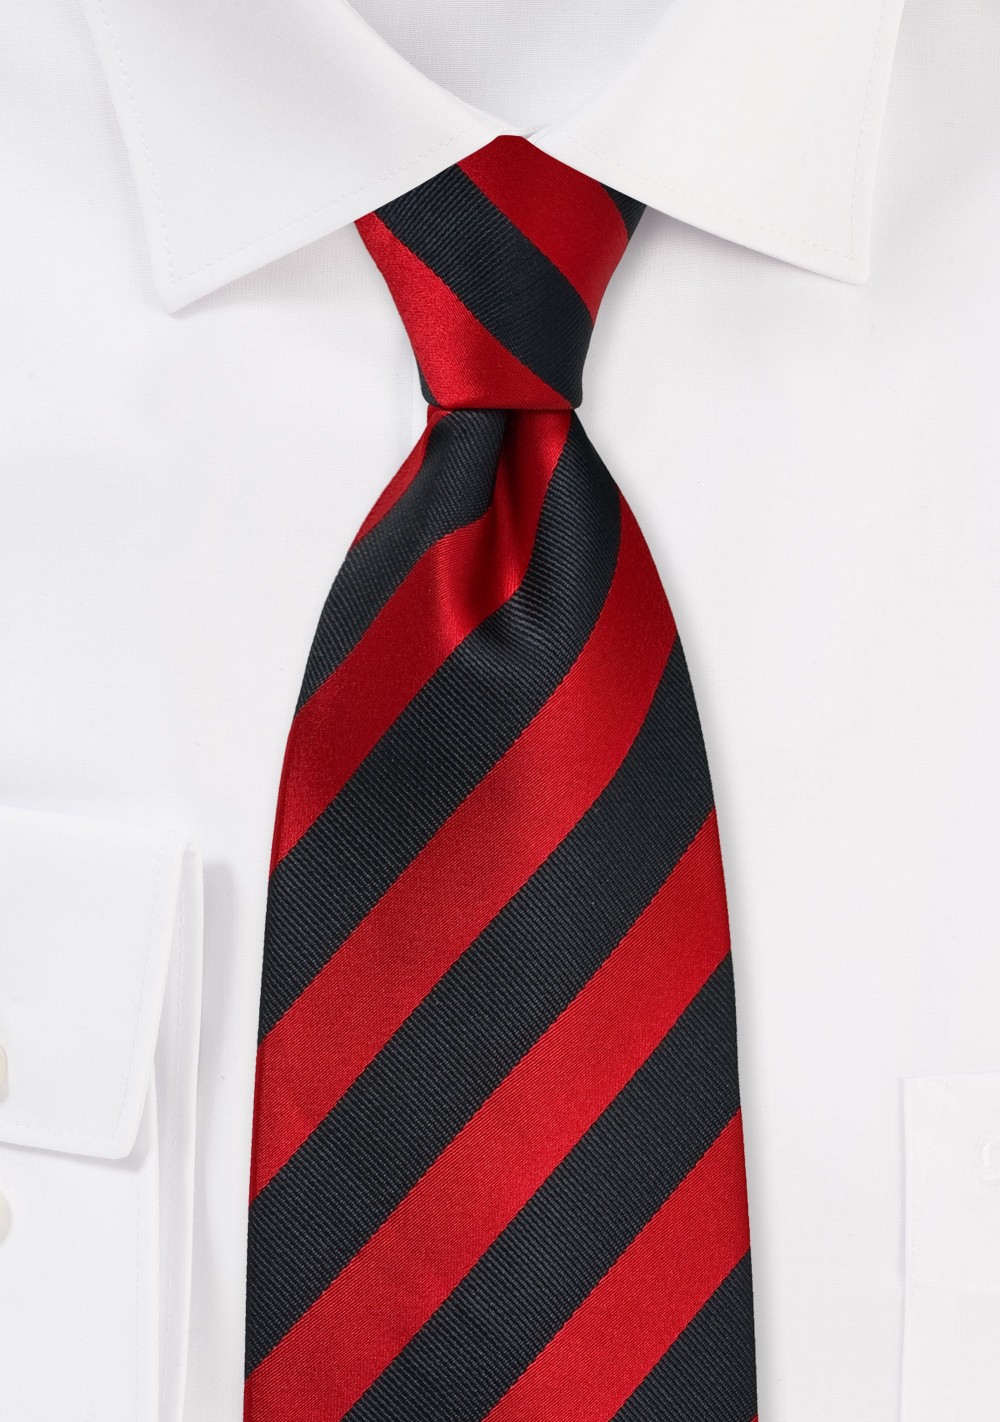 White Stripe  Football Club Tie NEW Red with Black 